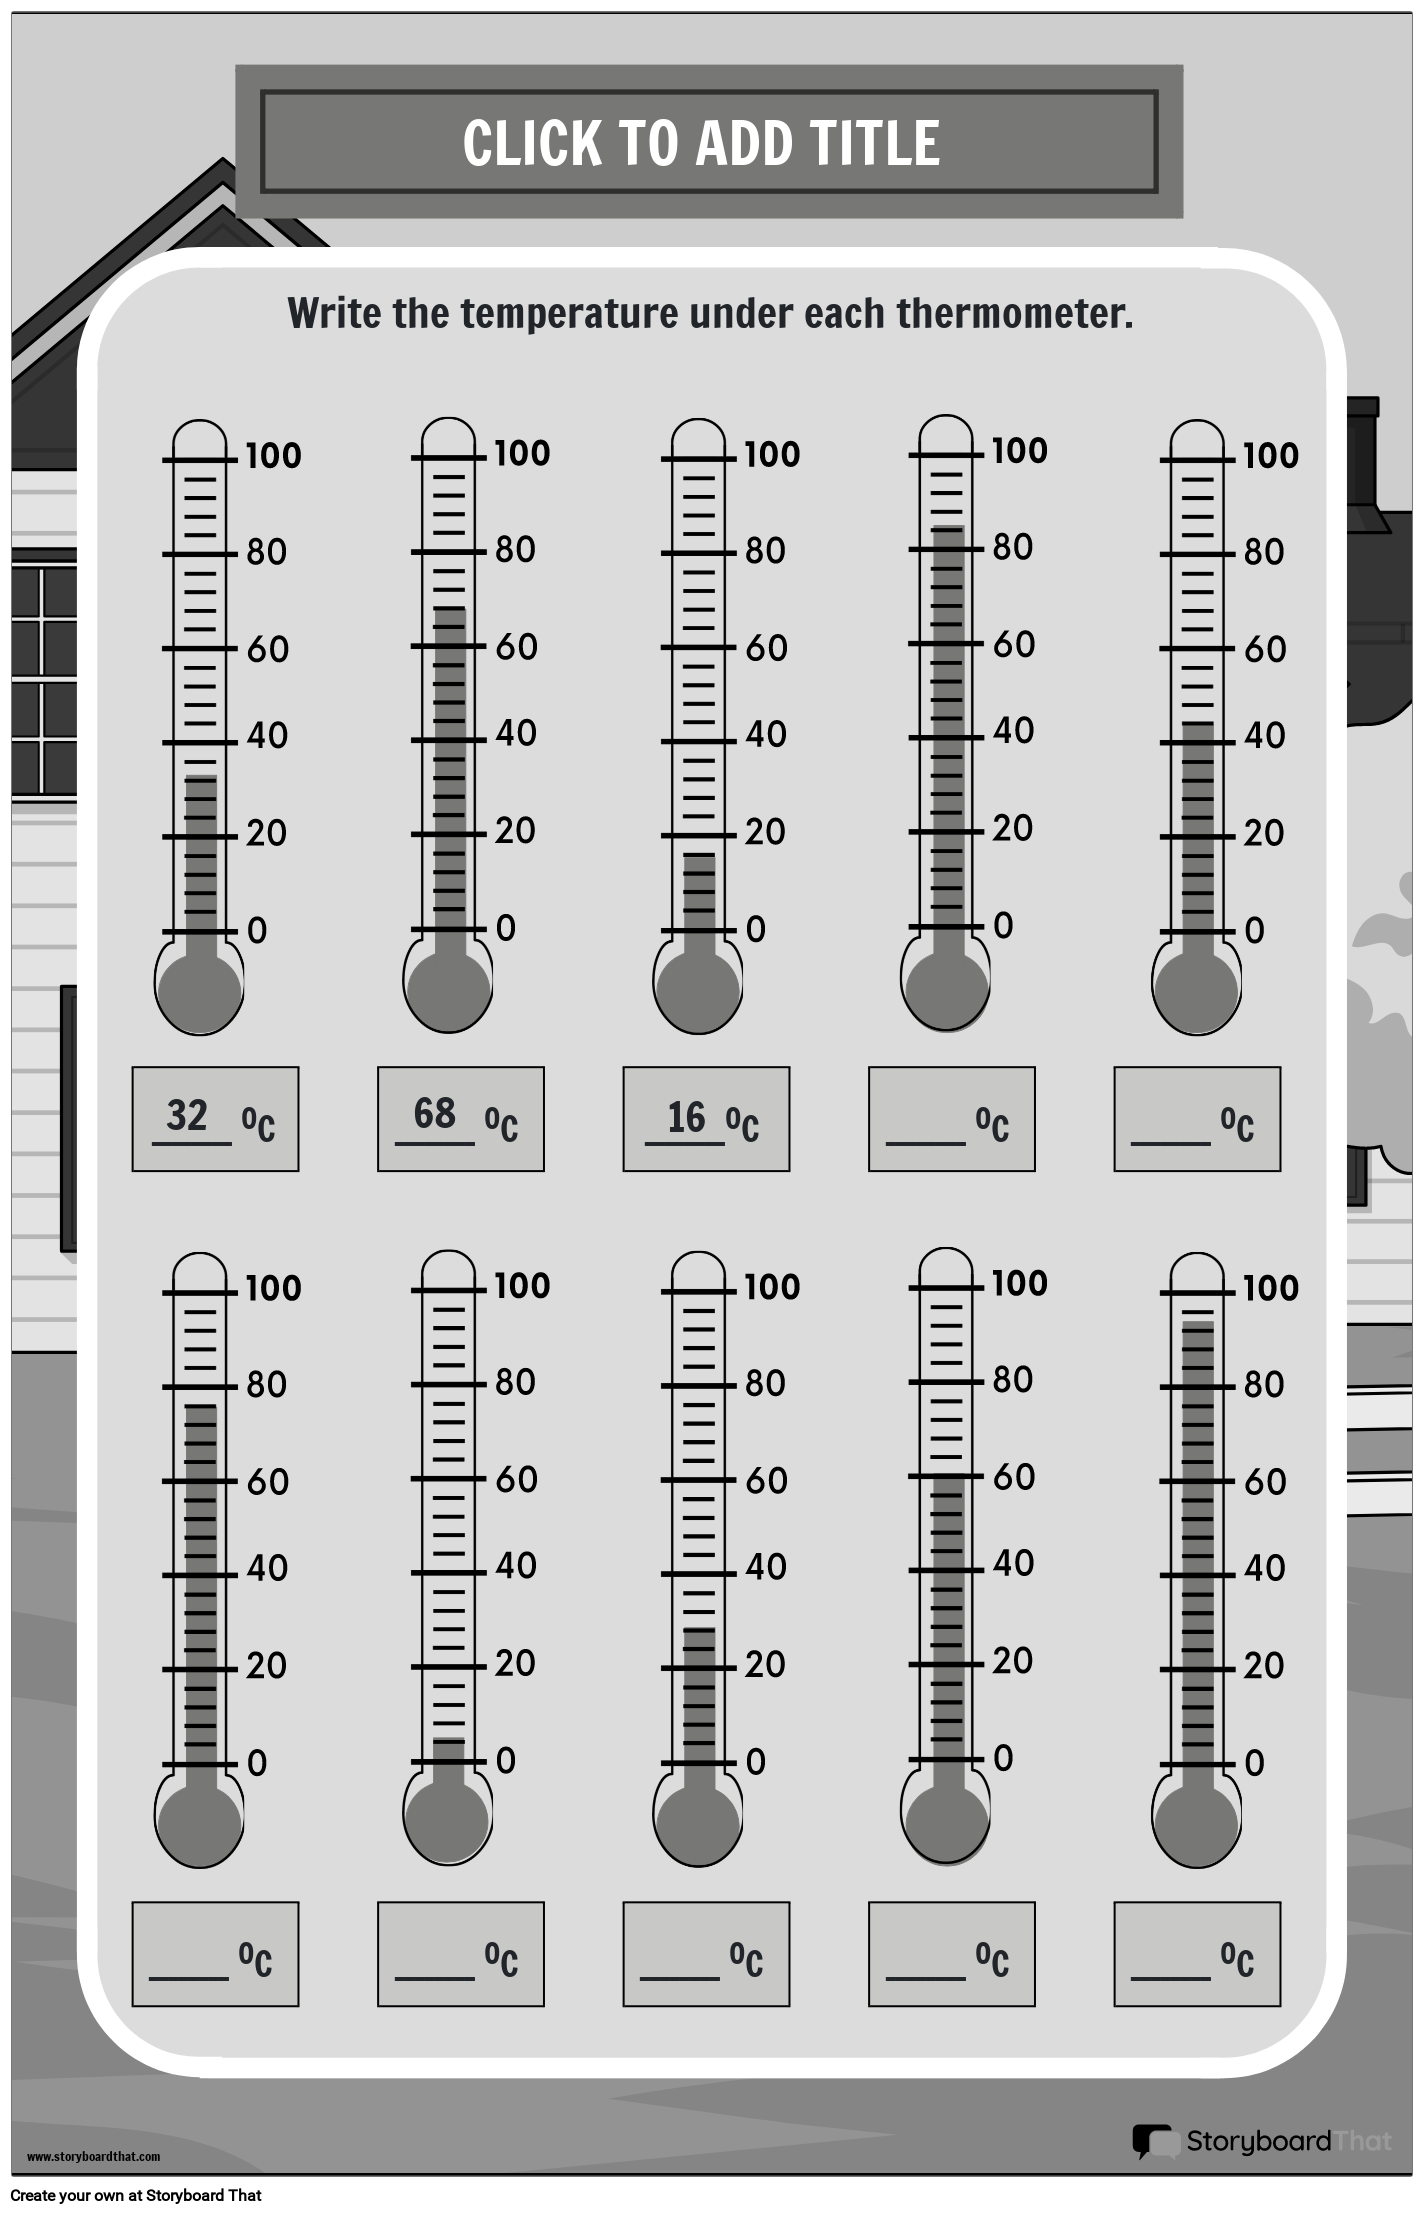 UNITS OF MEASUREMENT - TEMPERATURE POSTER WITH THERMOMETERS